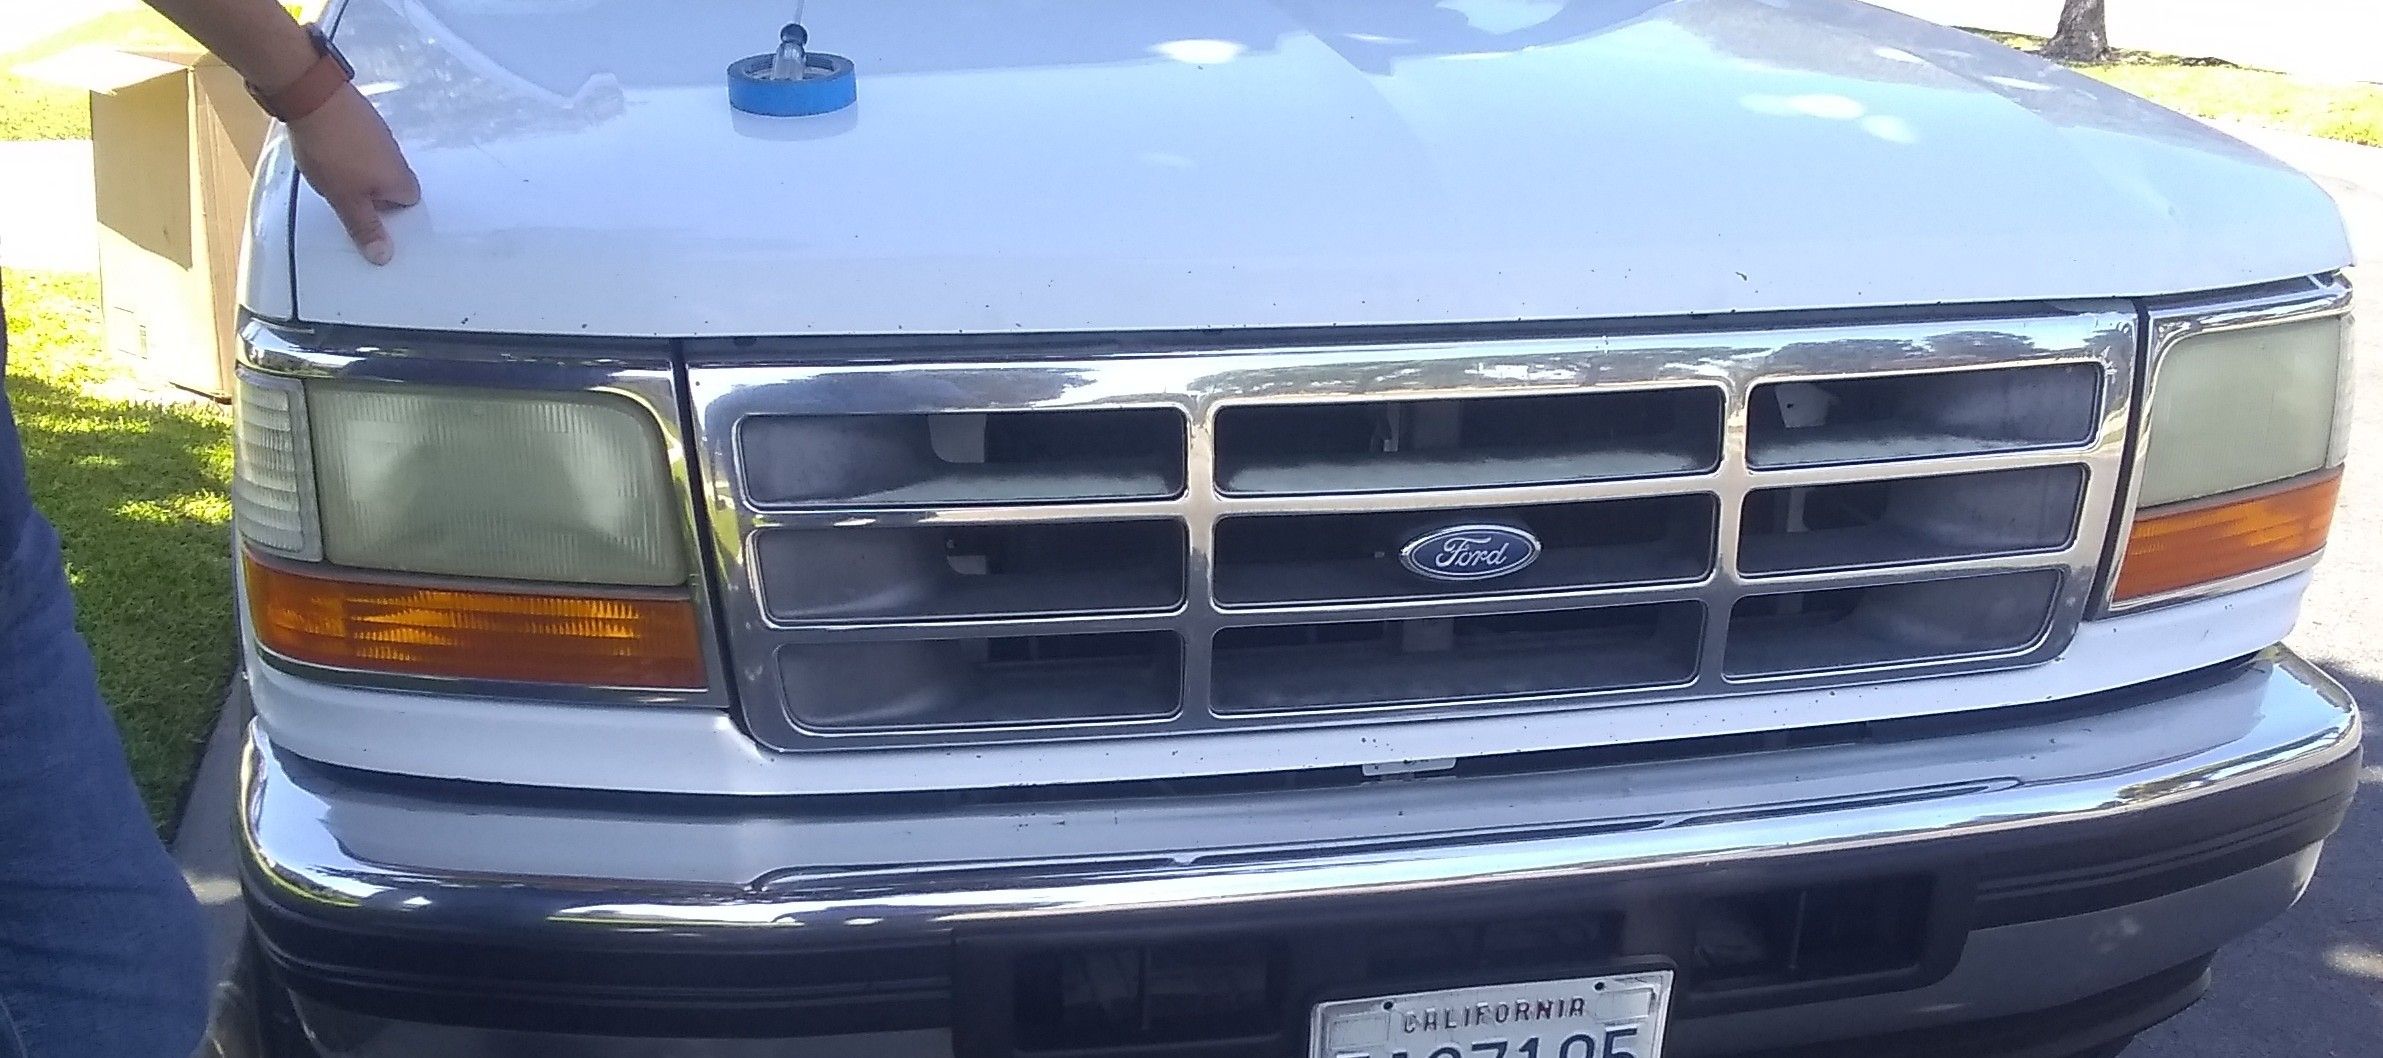 F150 headlights and taillights